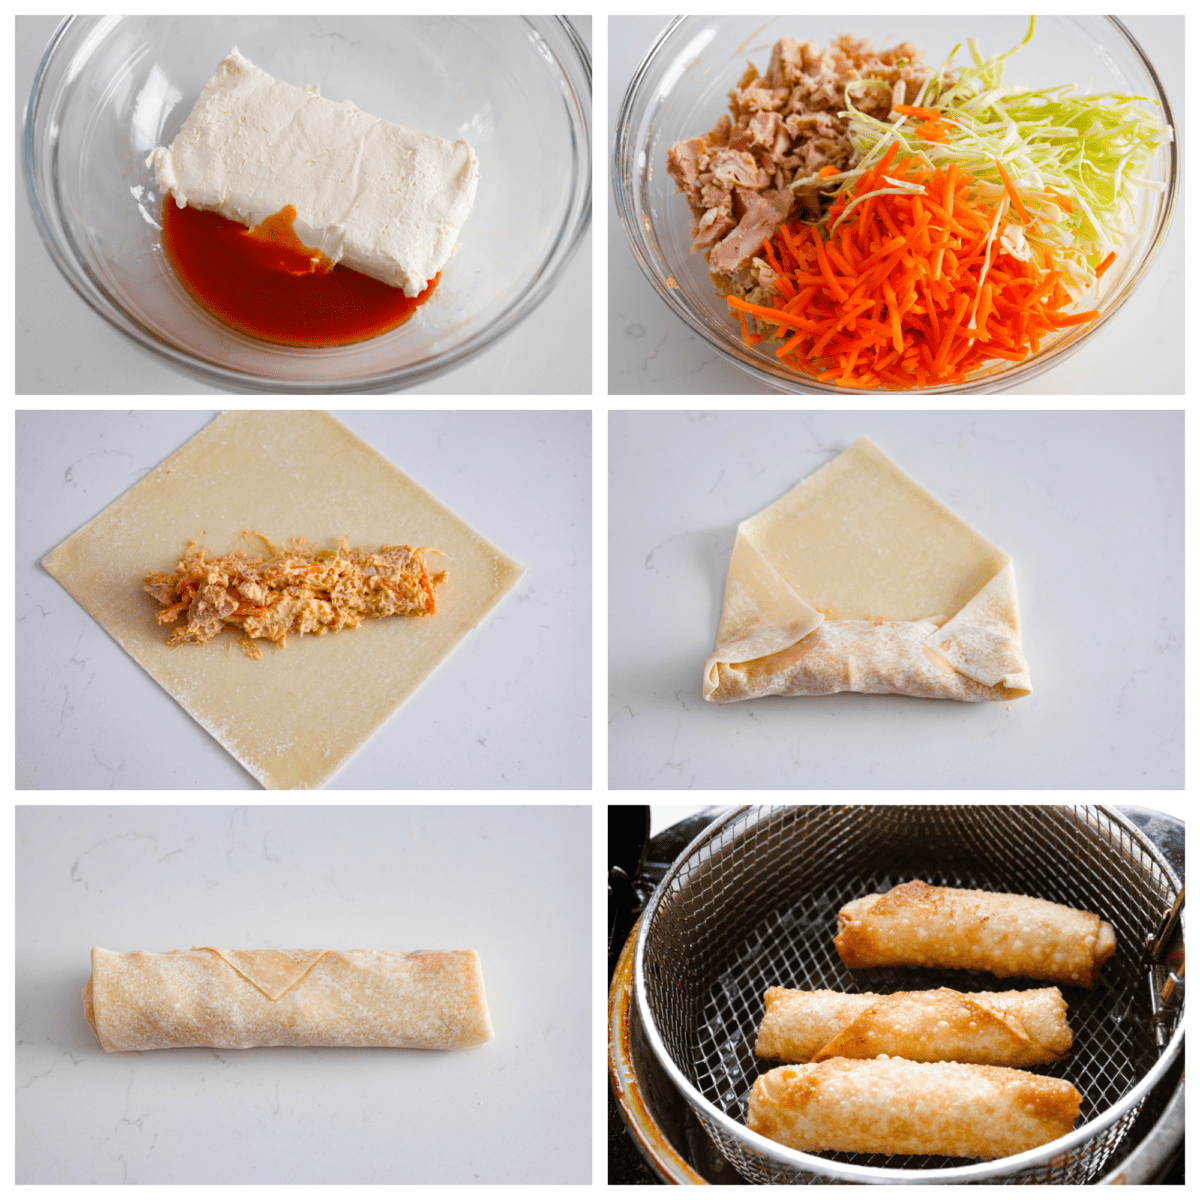 6 pictures in a collage showing the steps on how to hoke the egg rolls. 